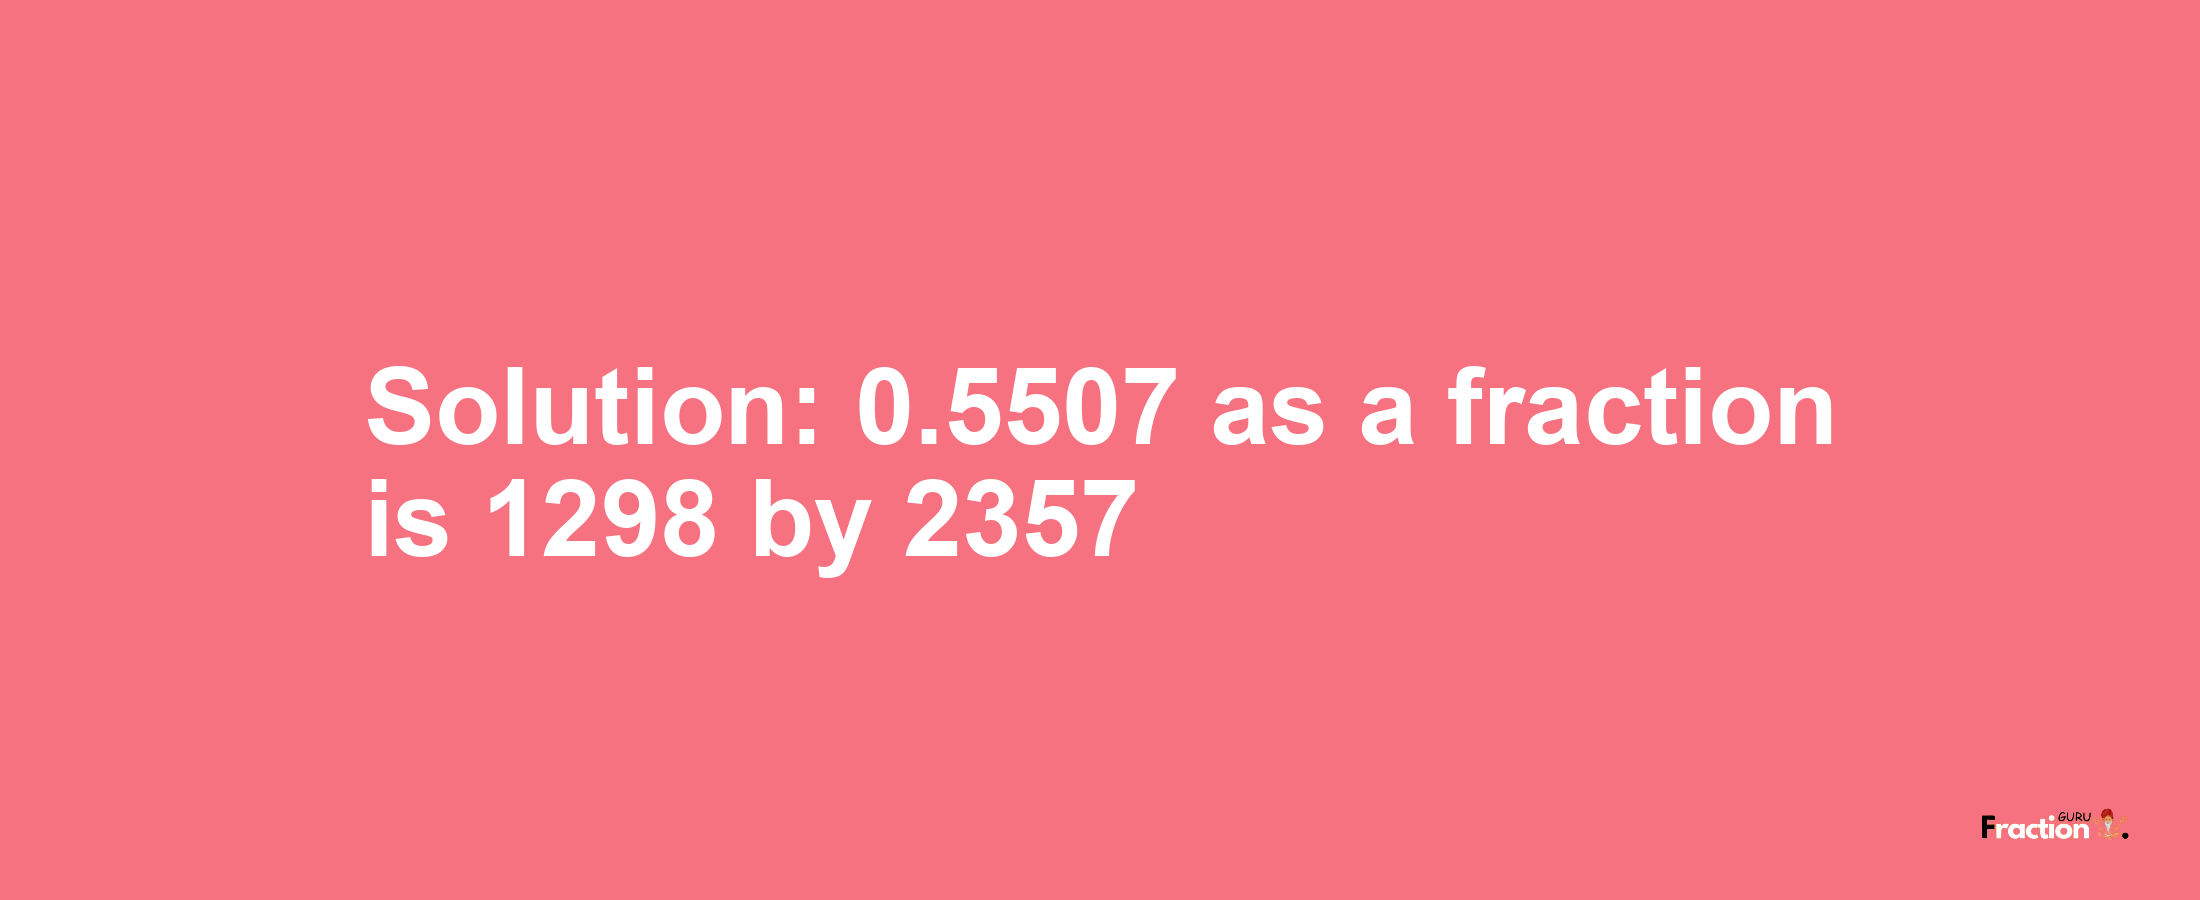 Solution:0.5507 as a fraction is 1298/2357